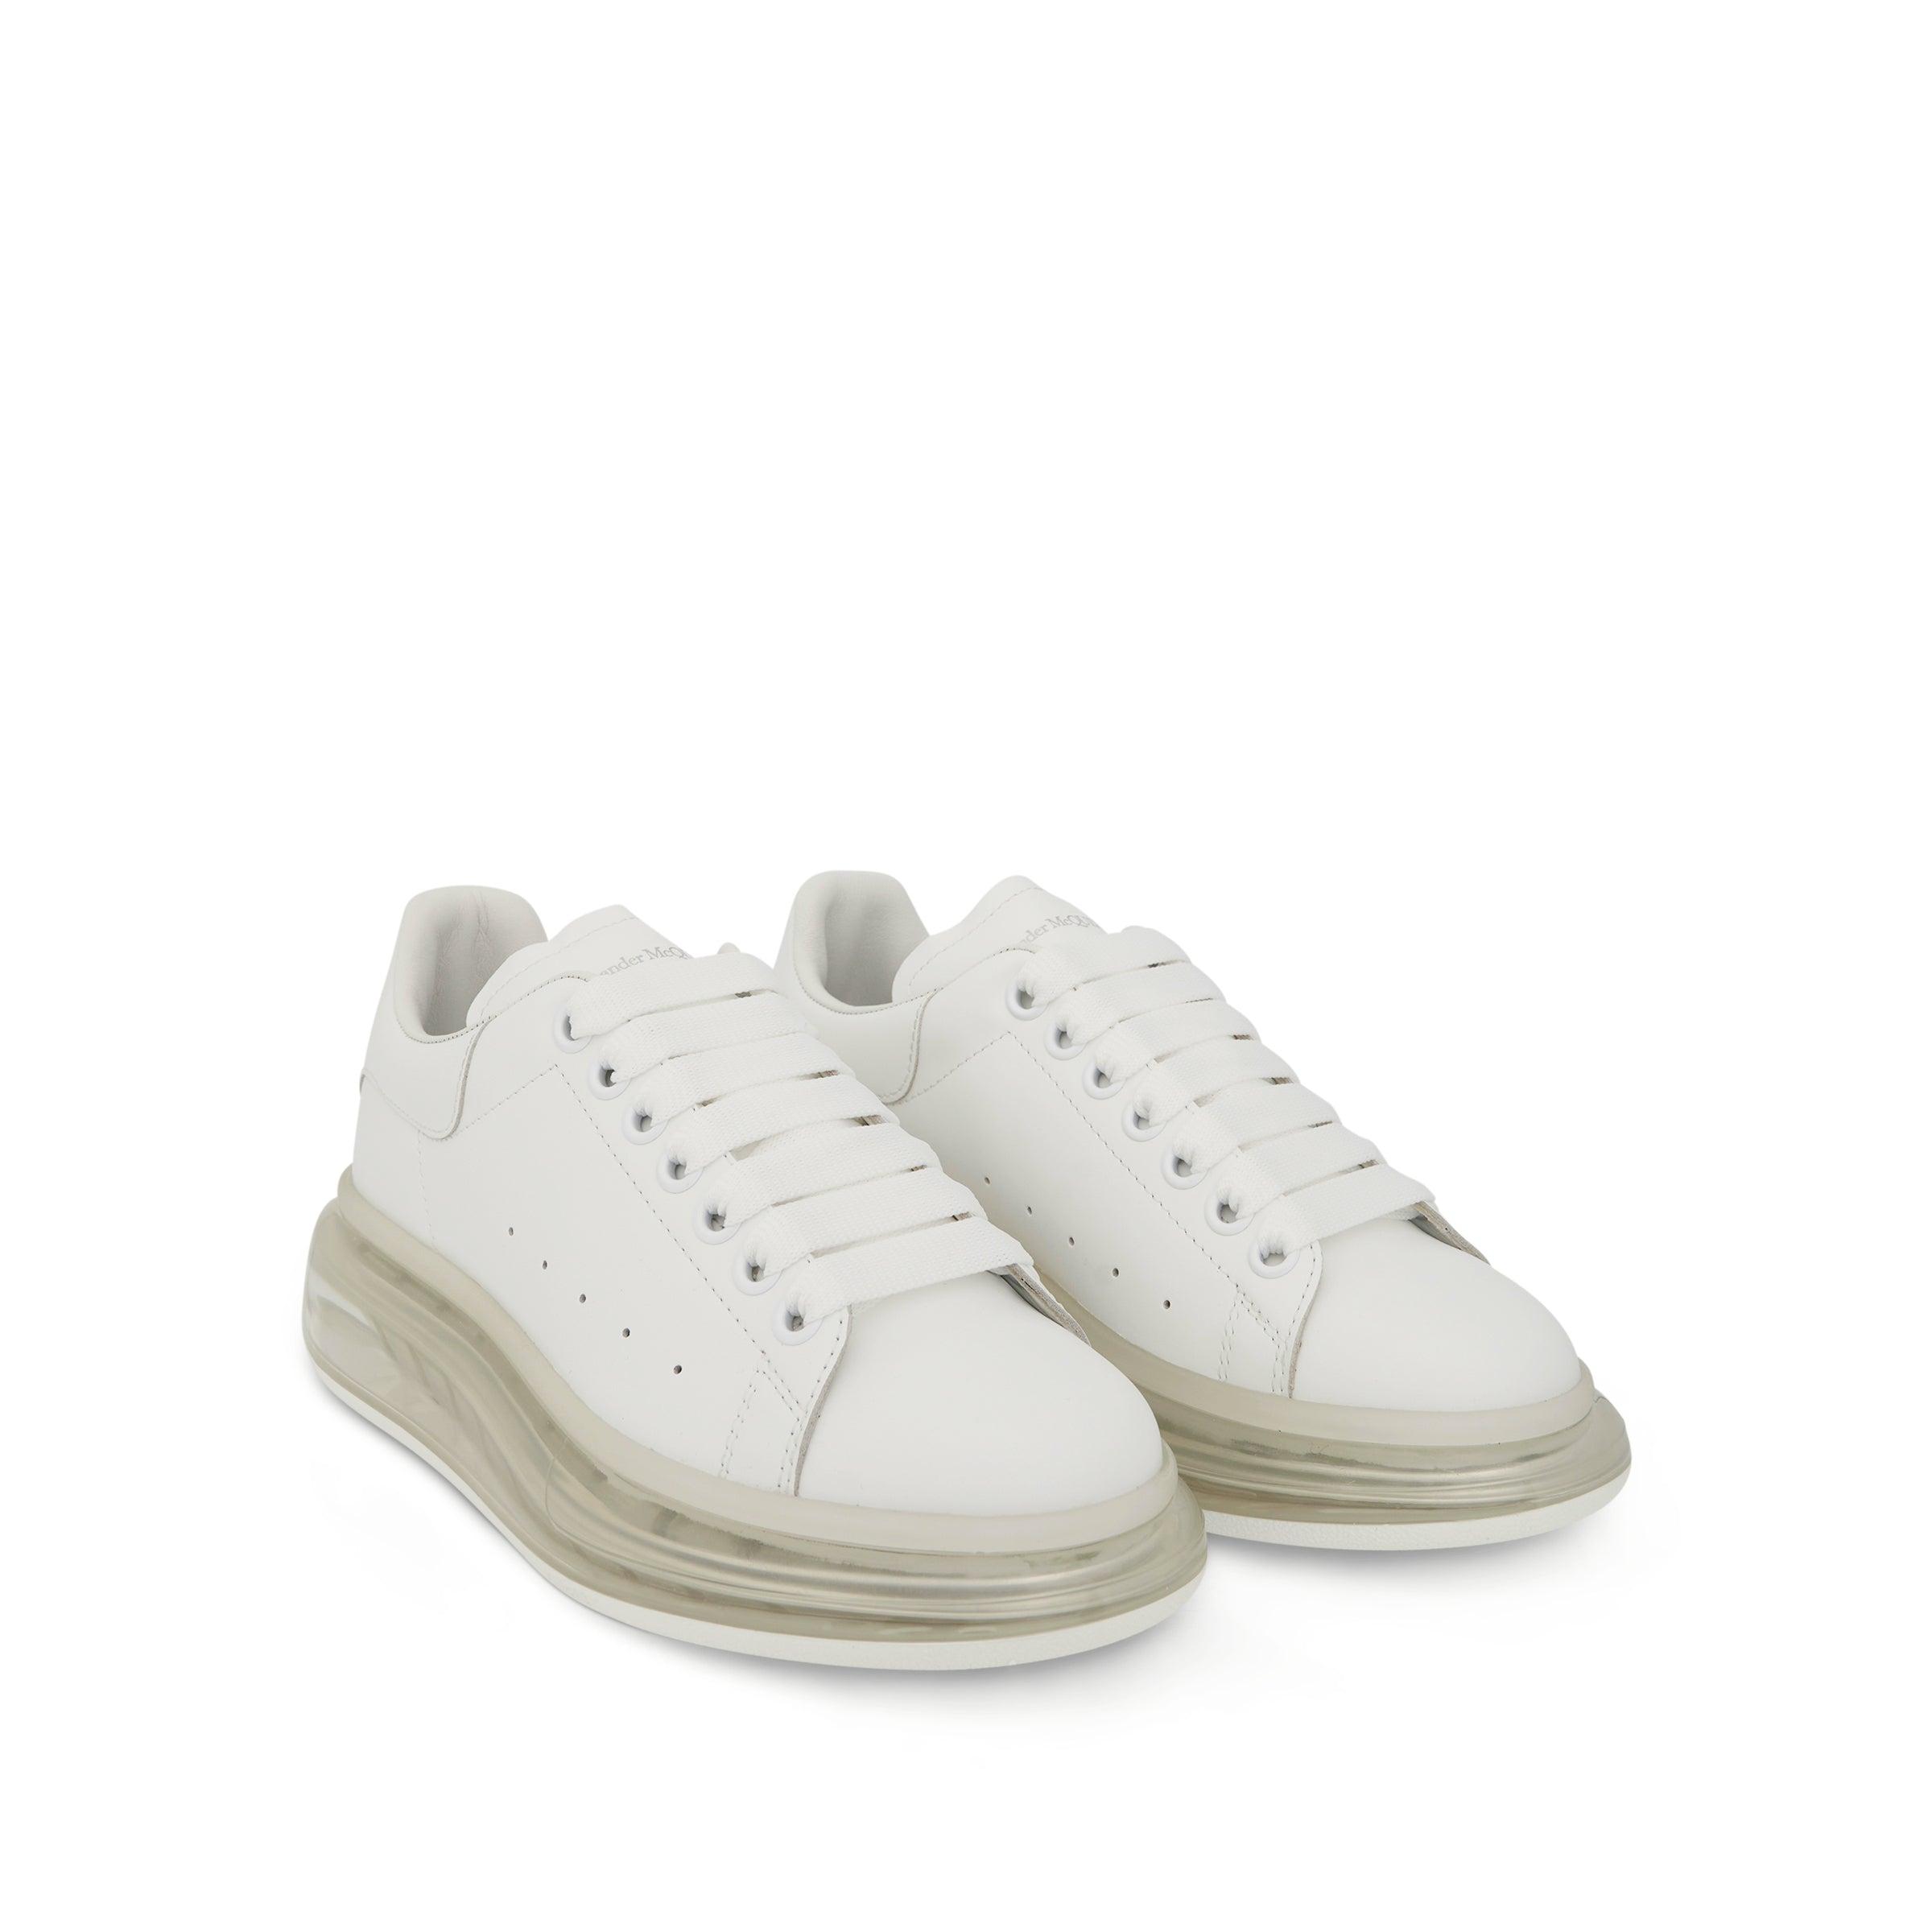 Alexander McQueen Larry Transparent Sole Sneakers In White/white | Lyst